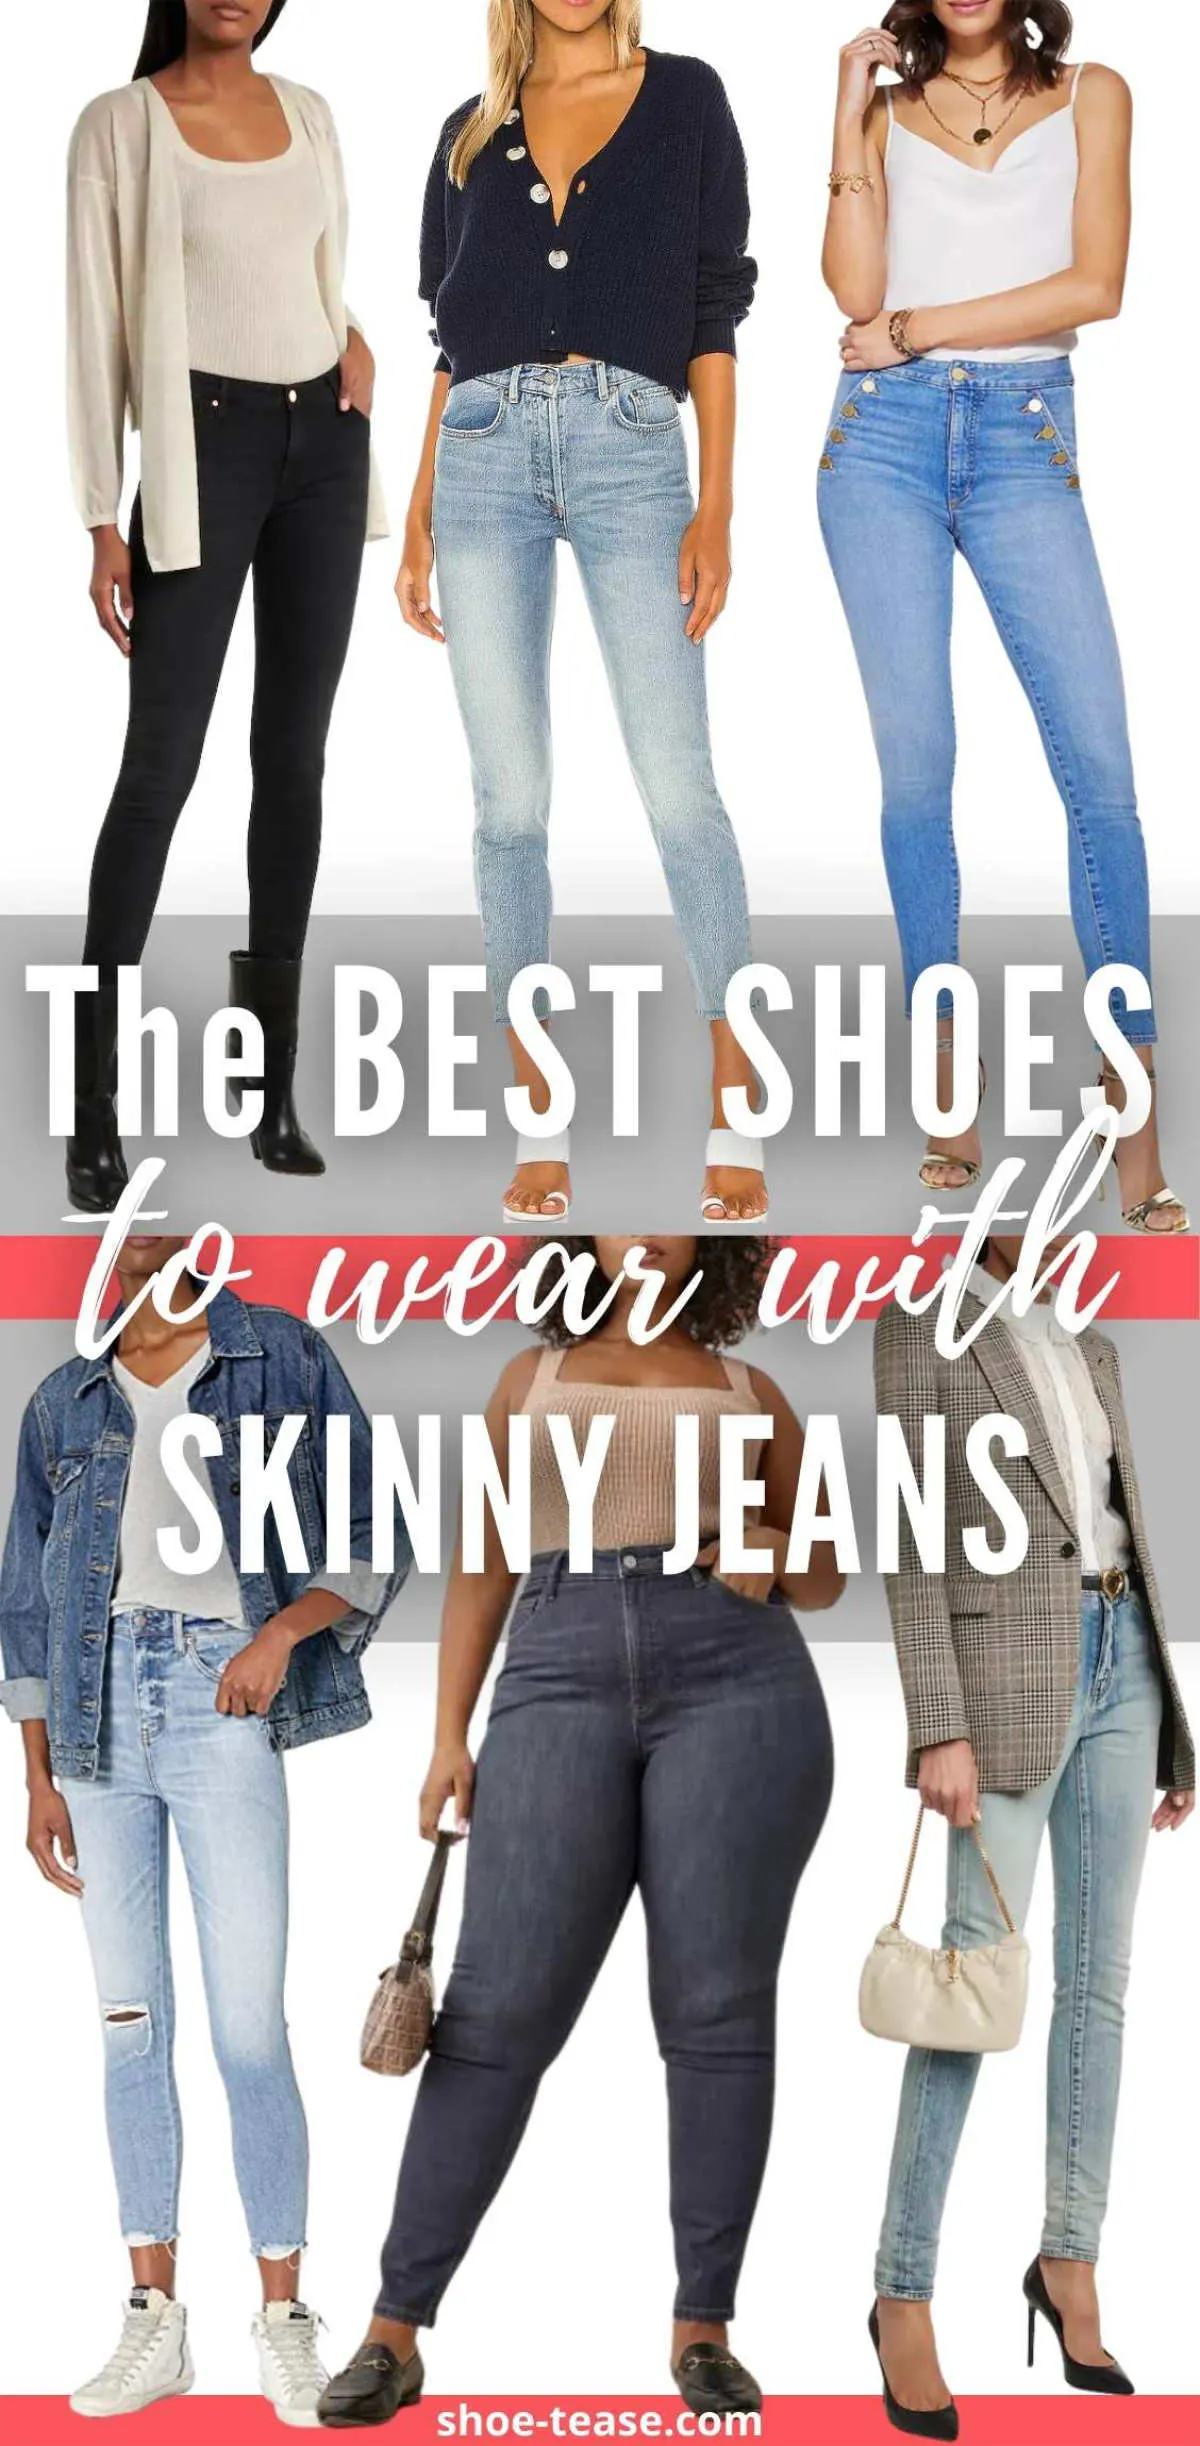 Kruiden technisch Celsius Curious What Shoes to Wear with Skinny Jeans Outfits? Here are 15!